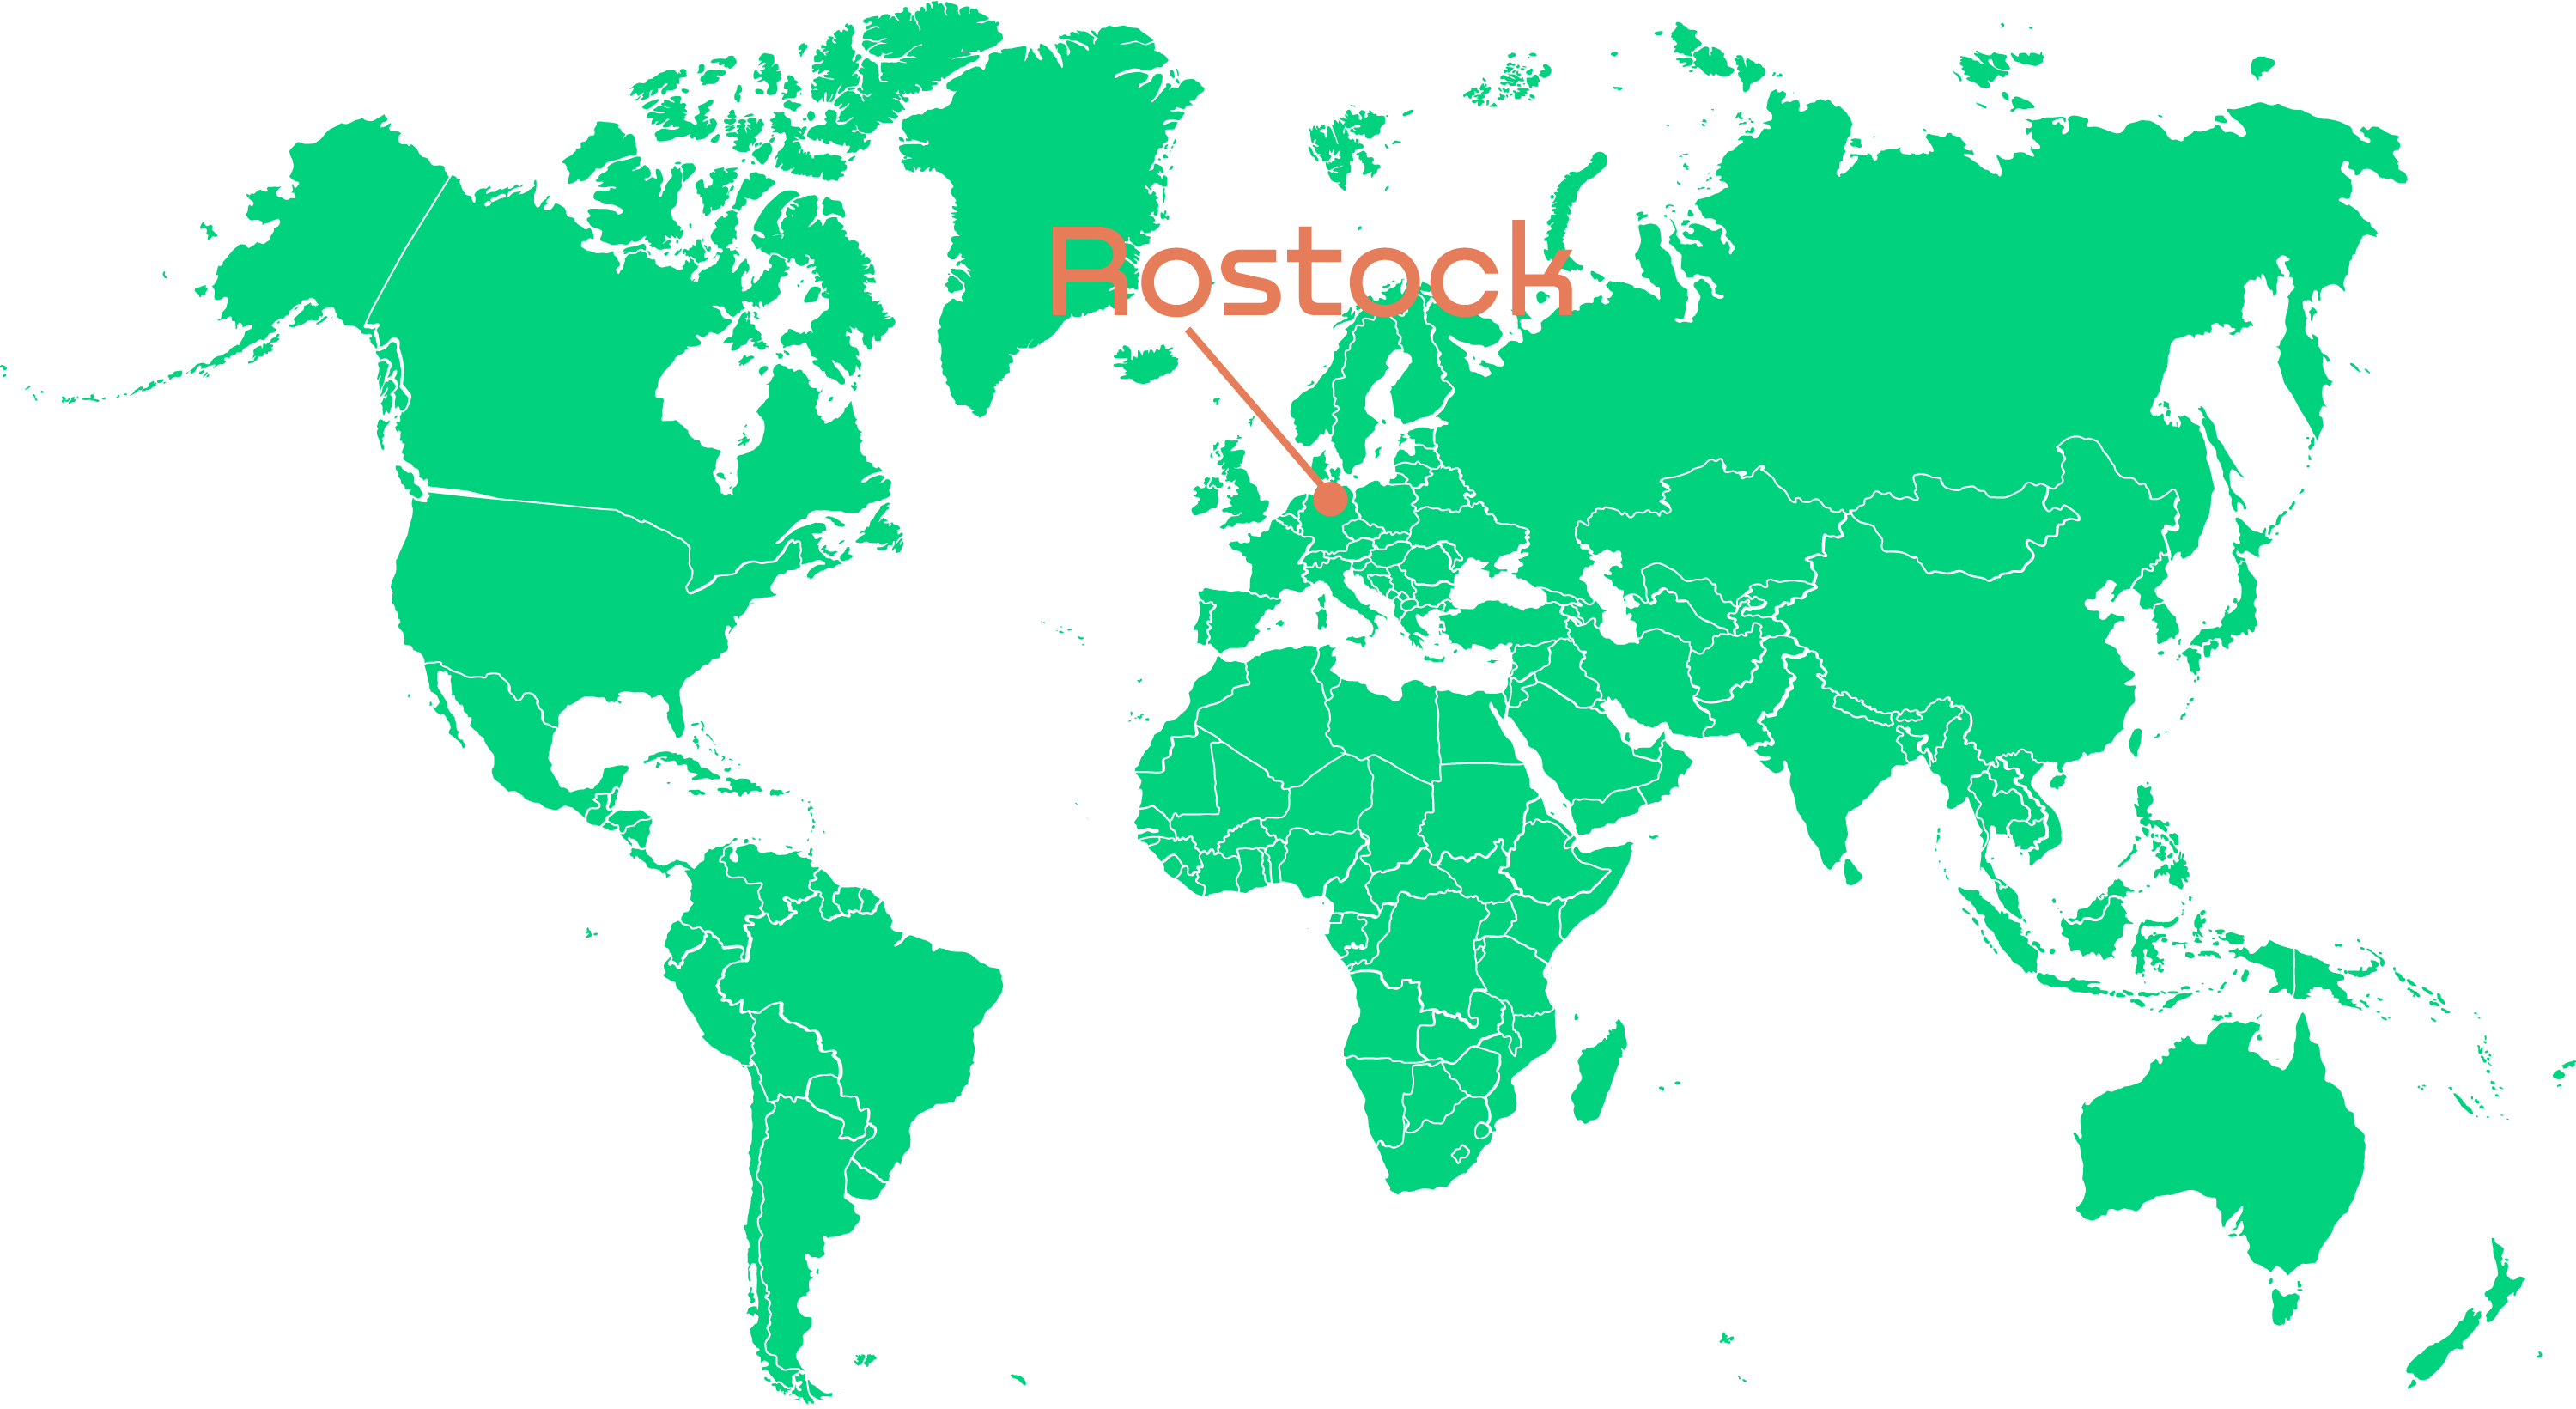 This image shows a green world map with marker on Rostock